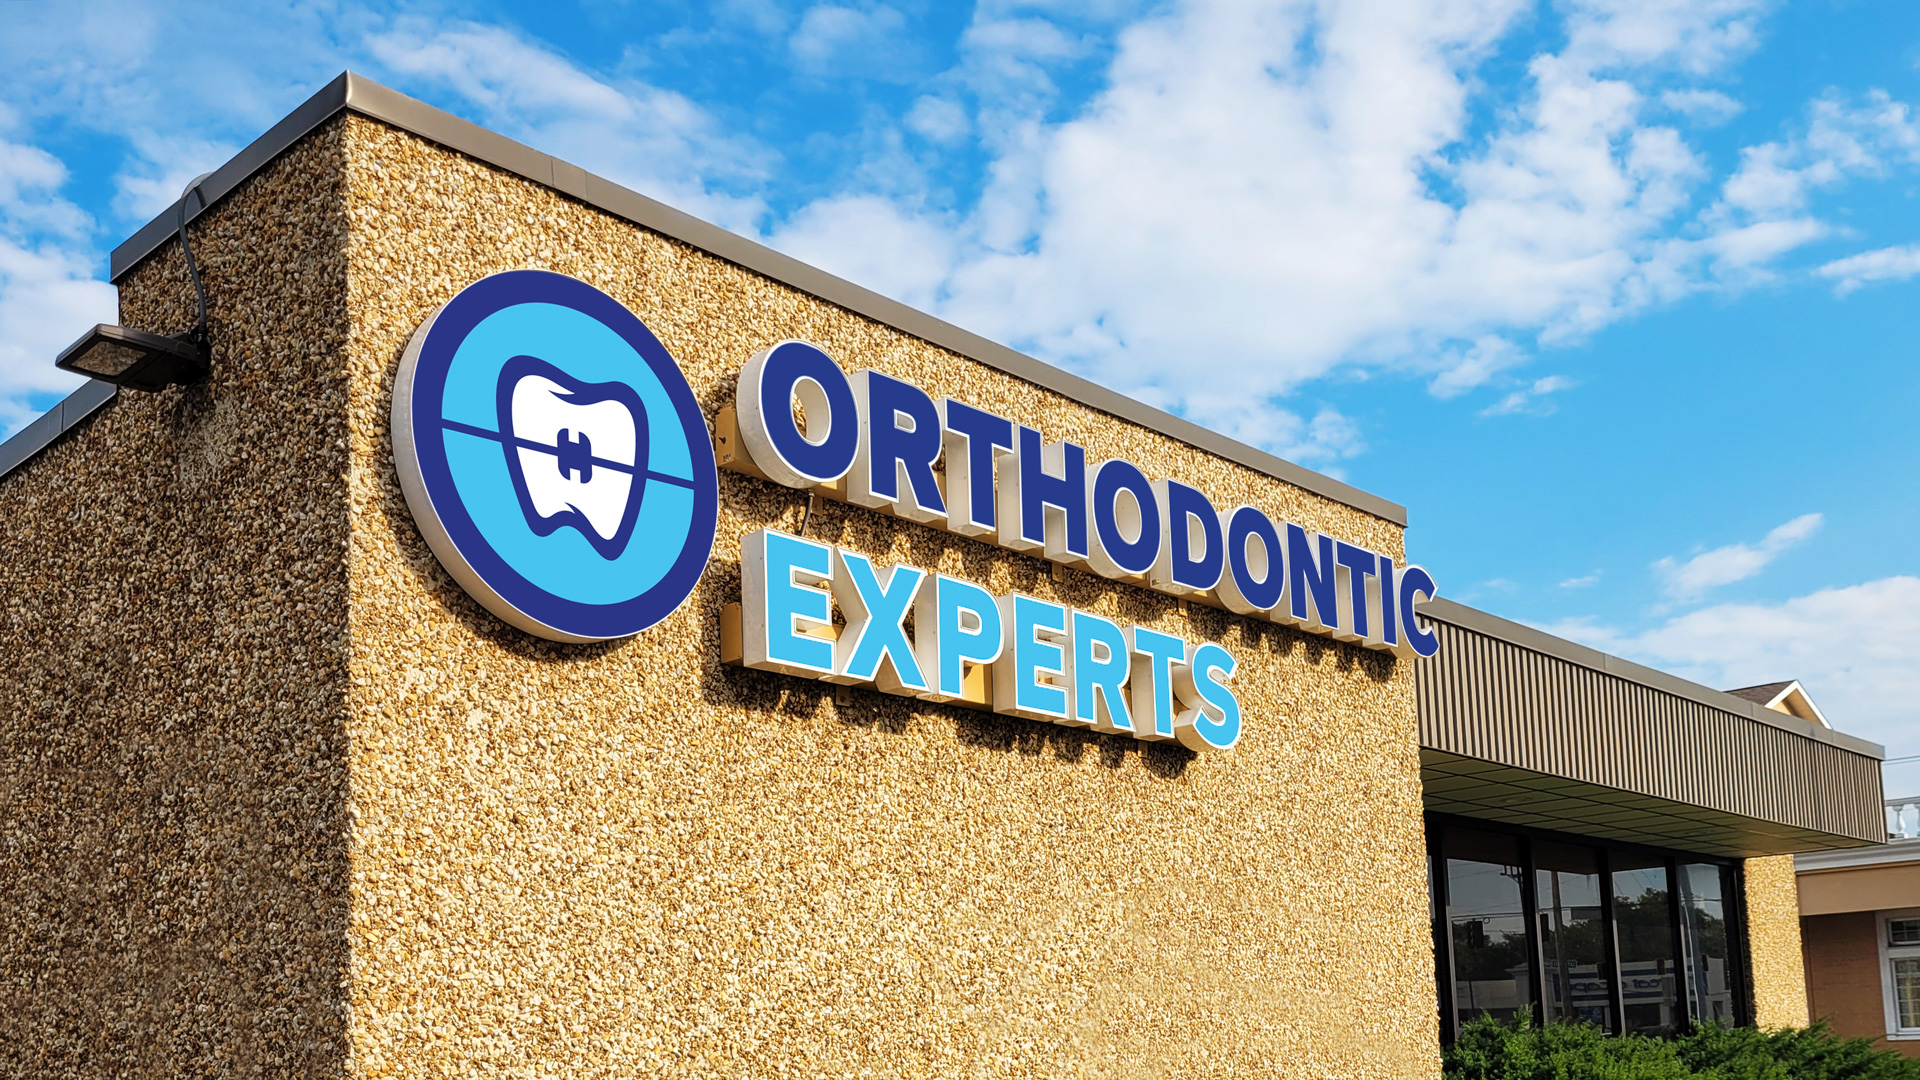 Orthodontic Experts logo design on the building sign